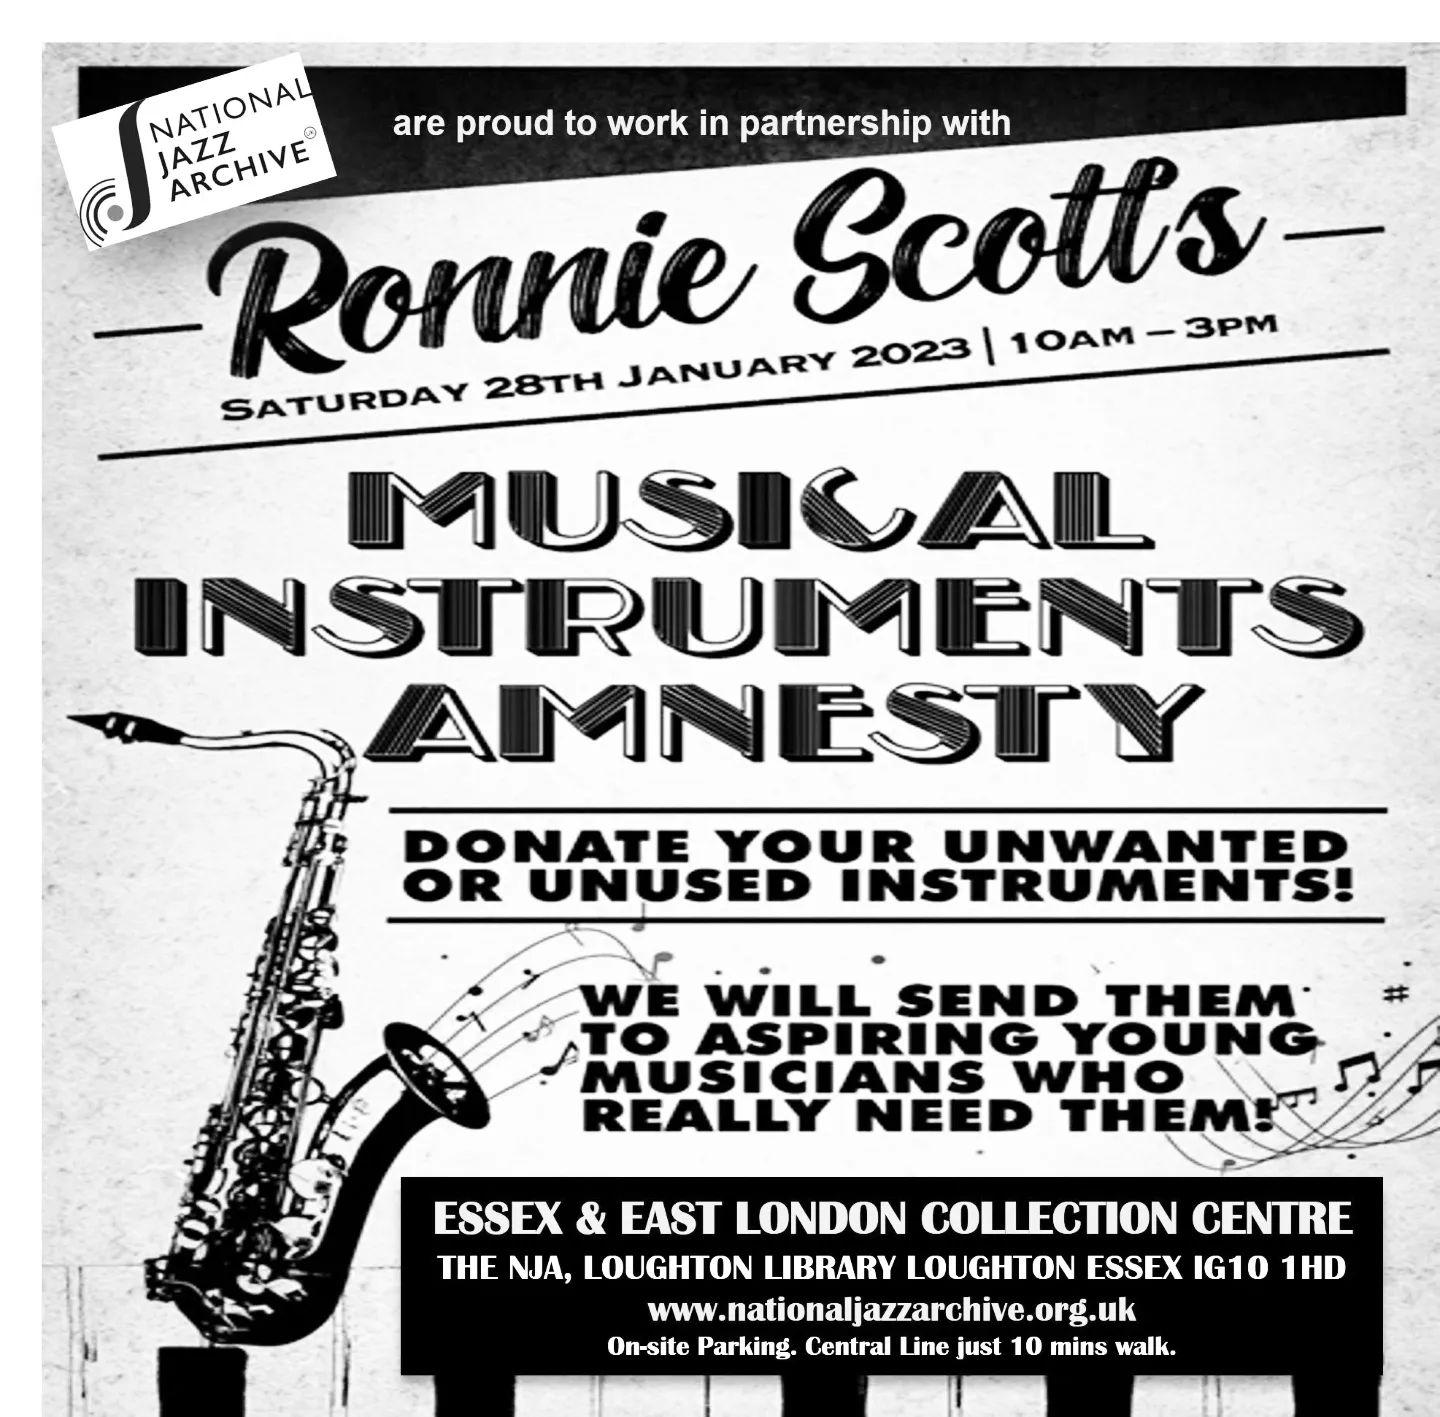 Ronnie Scott's comes to Essex (sort of